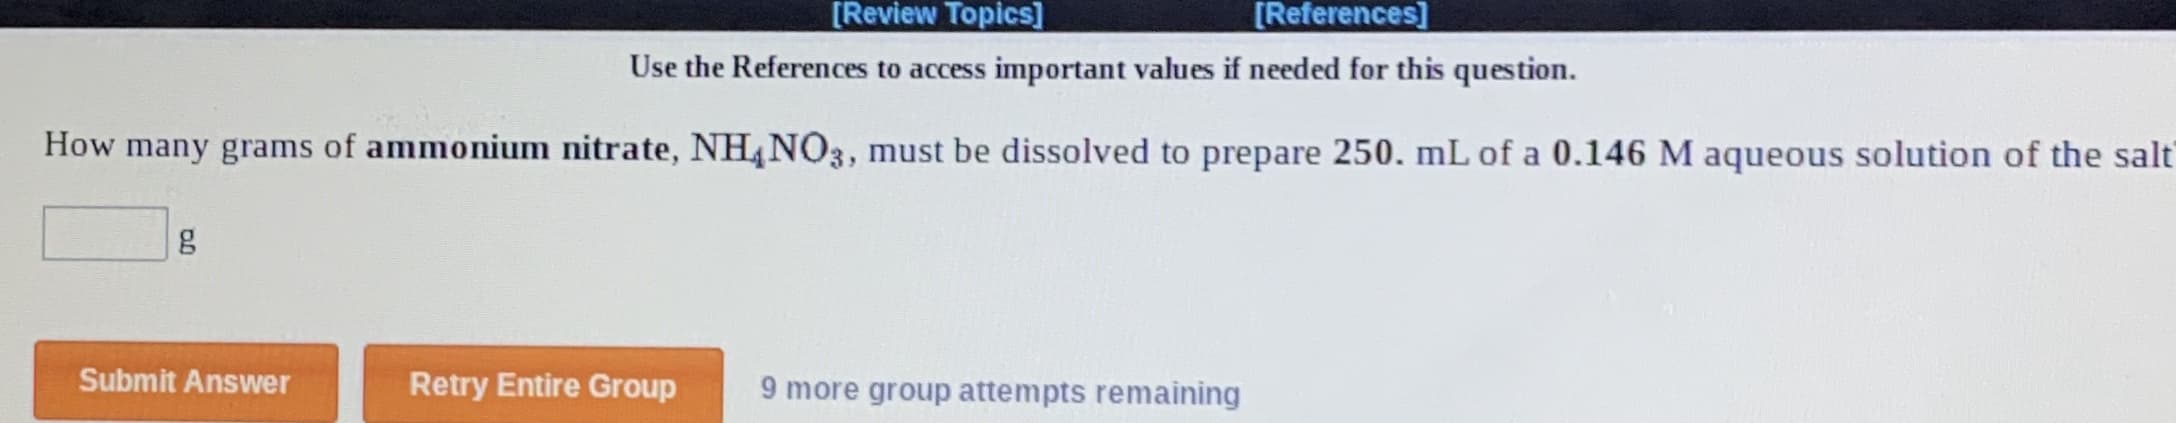 [Review Topics]
[References]
Use the References to access important values if needed for this question.
How many grams of ammonium nitrate, NH4NO3, must be dissolved to prepare 250. mL of a 0.146 M aqueous solution of the salt
Submit Answer
Retry Entire Group
9 more group attempts remaining
